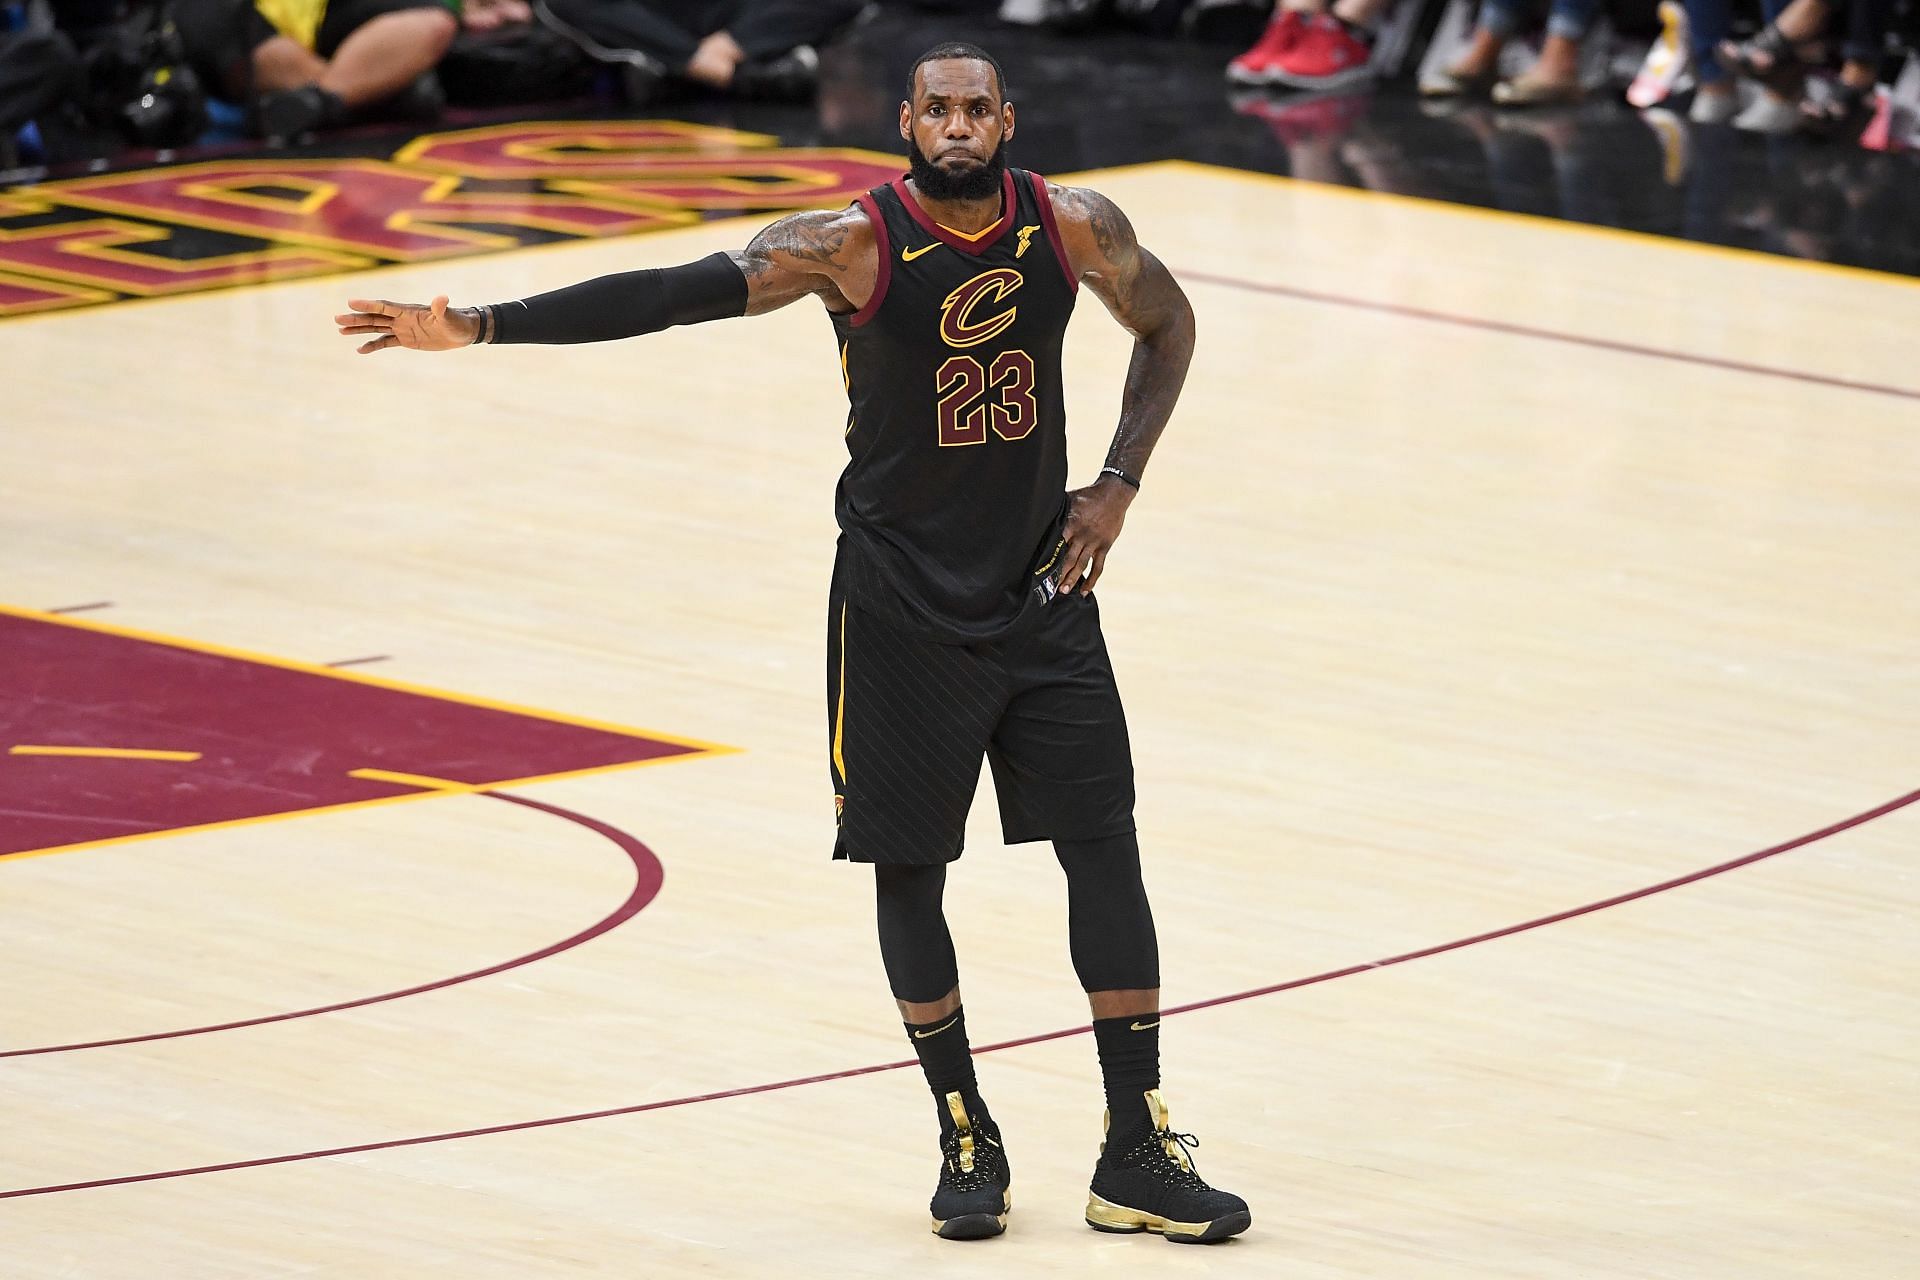 King James in the 2018 NBA Finals - Game Four